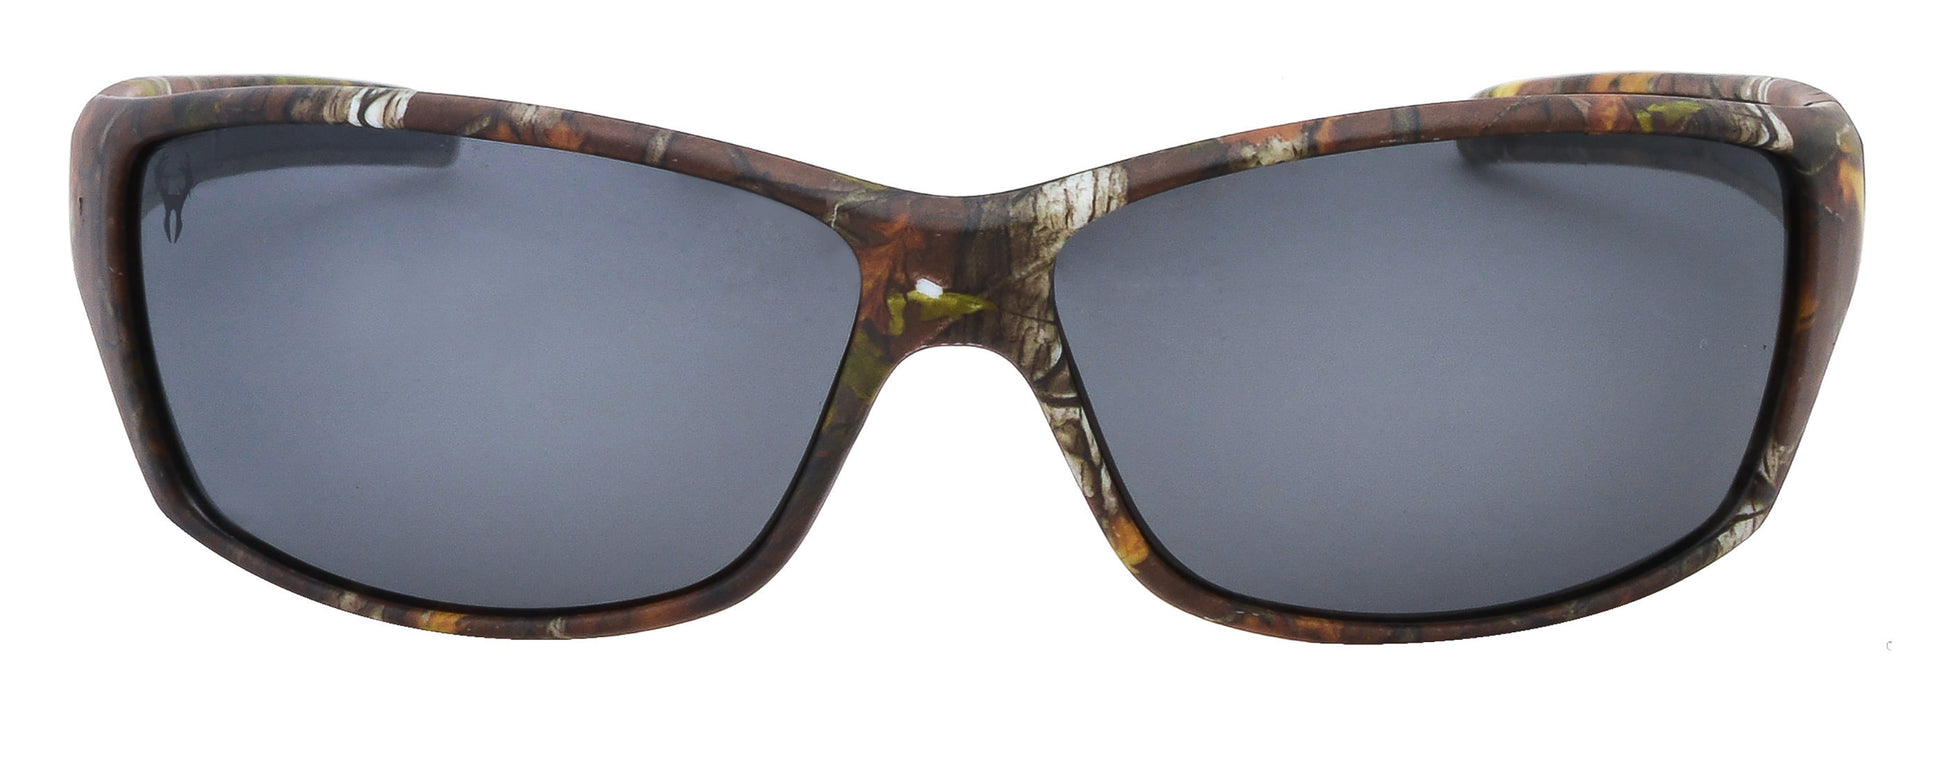 Men Polarized Camouflage Sunglasses For Fishing And Hunting, Camo Colored  Lenses